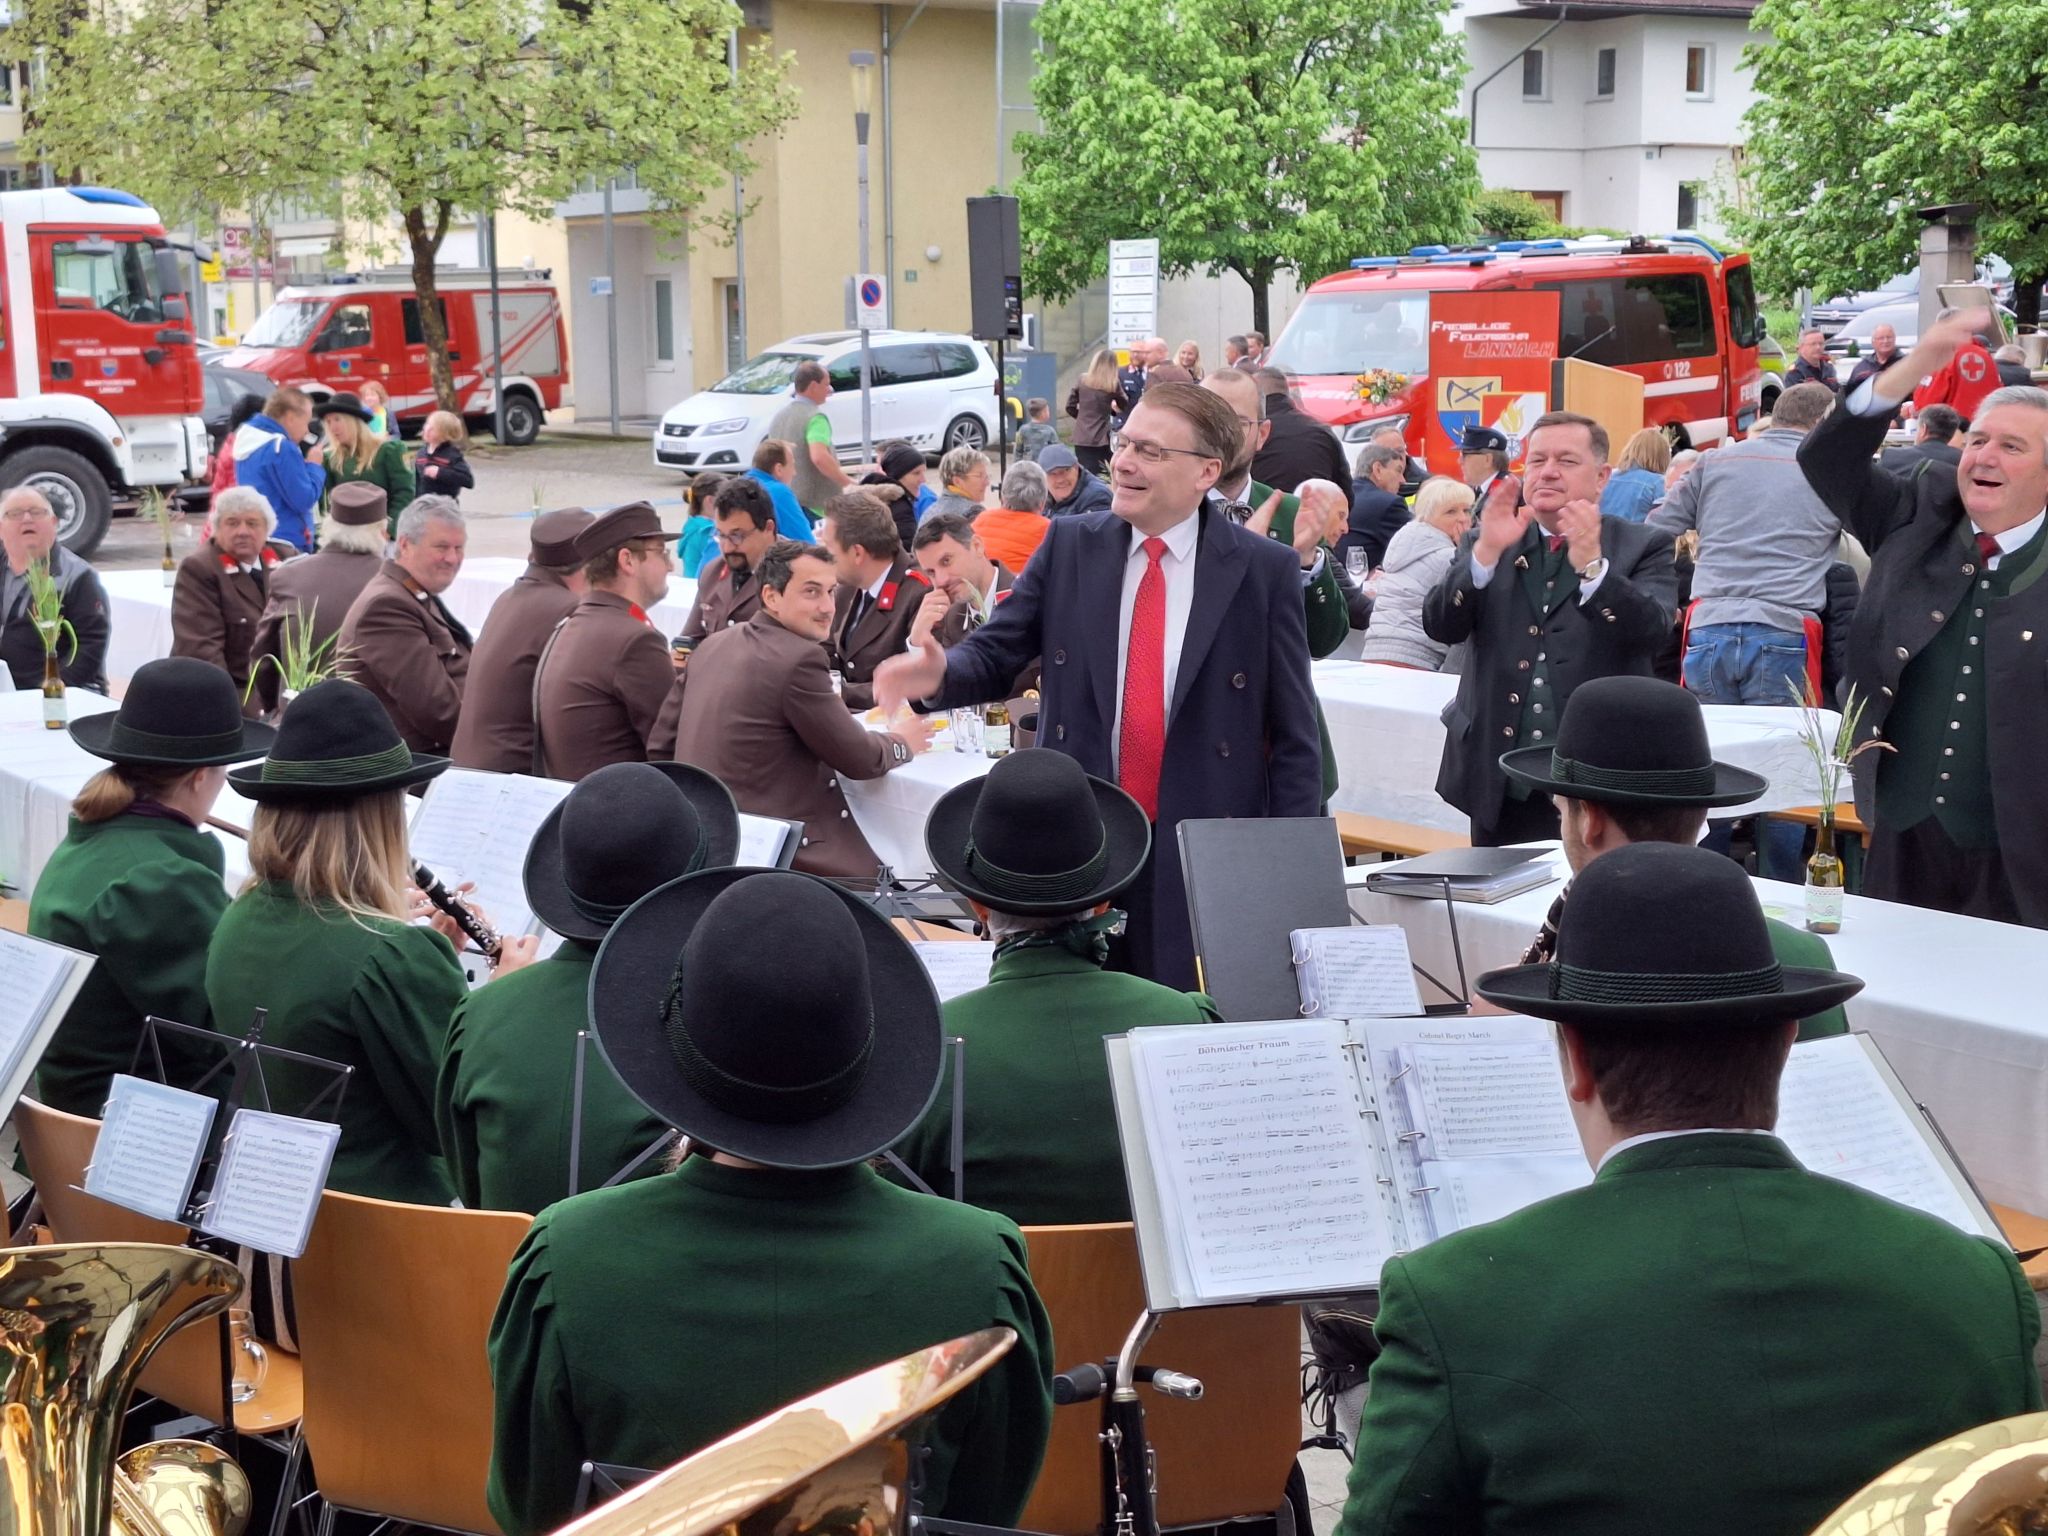 IOI President, Chris Field PSM, conducting a large band in rendition of the Josef Niggas March.